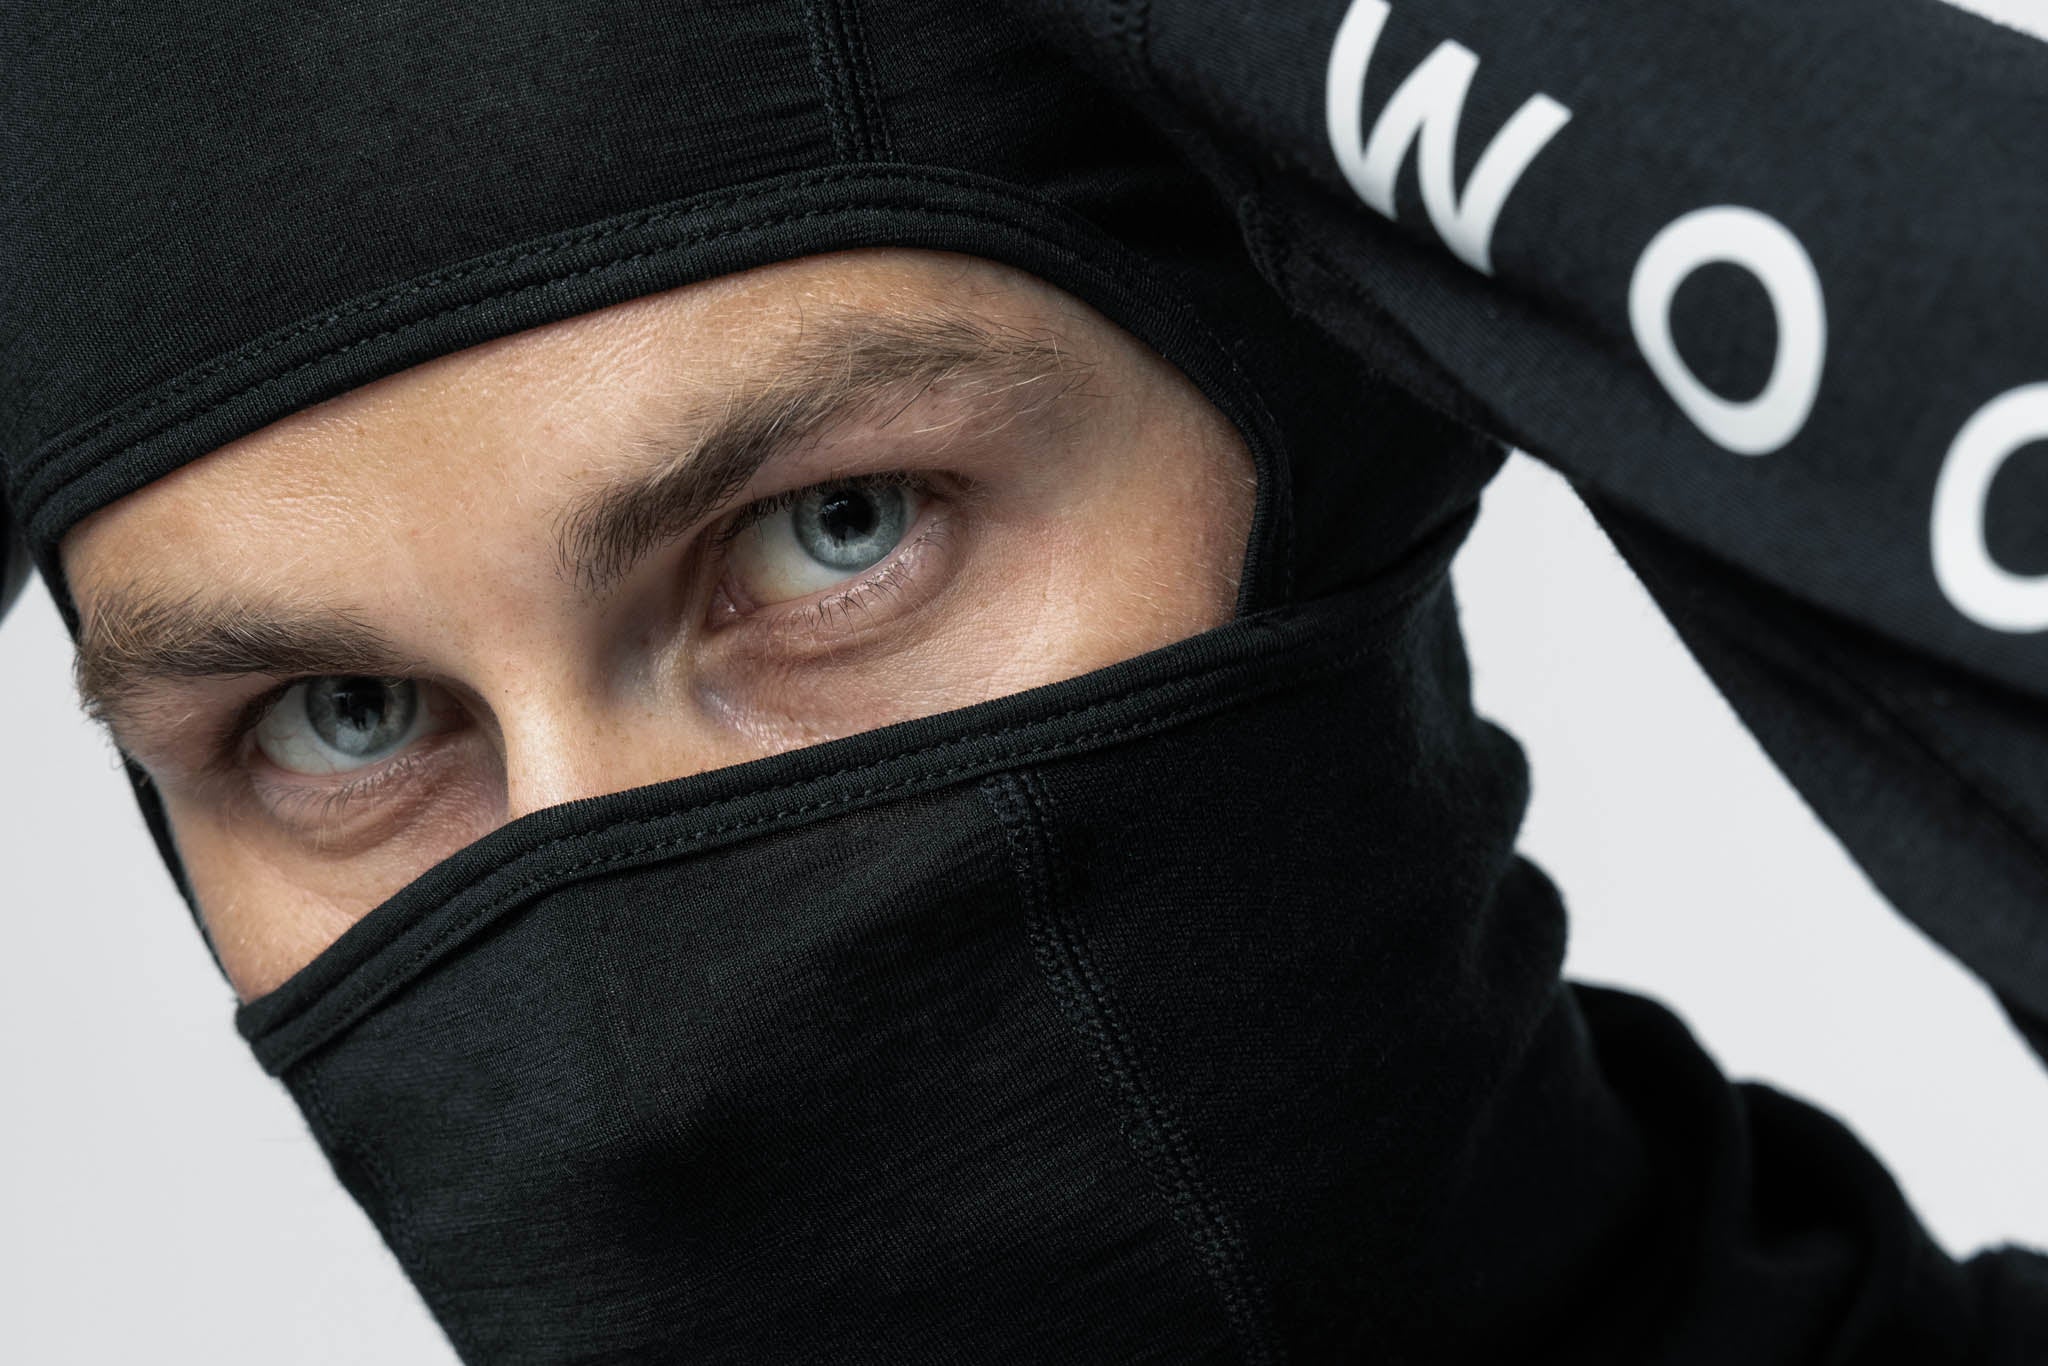 What makes a great balaclava? - The art of comfort and functionality.